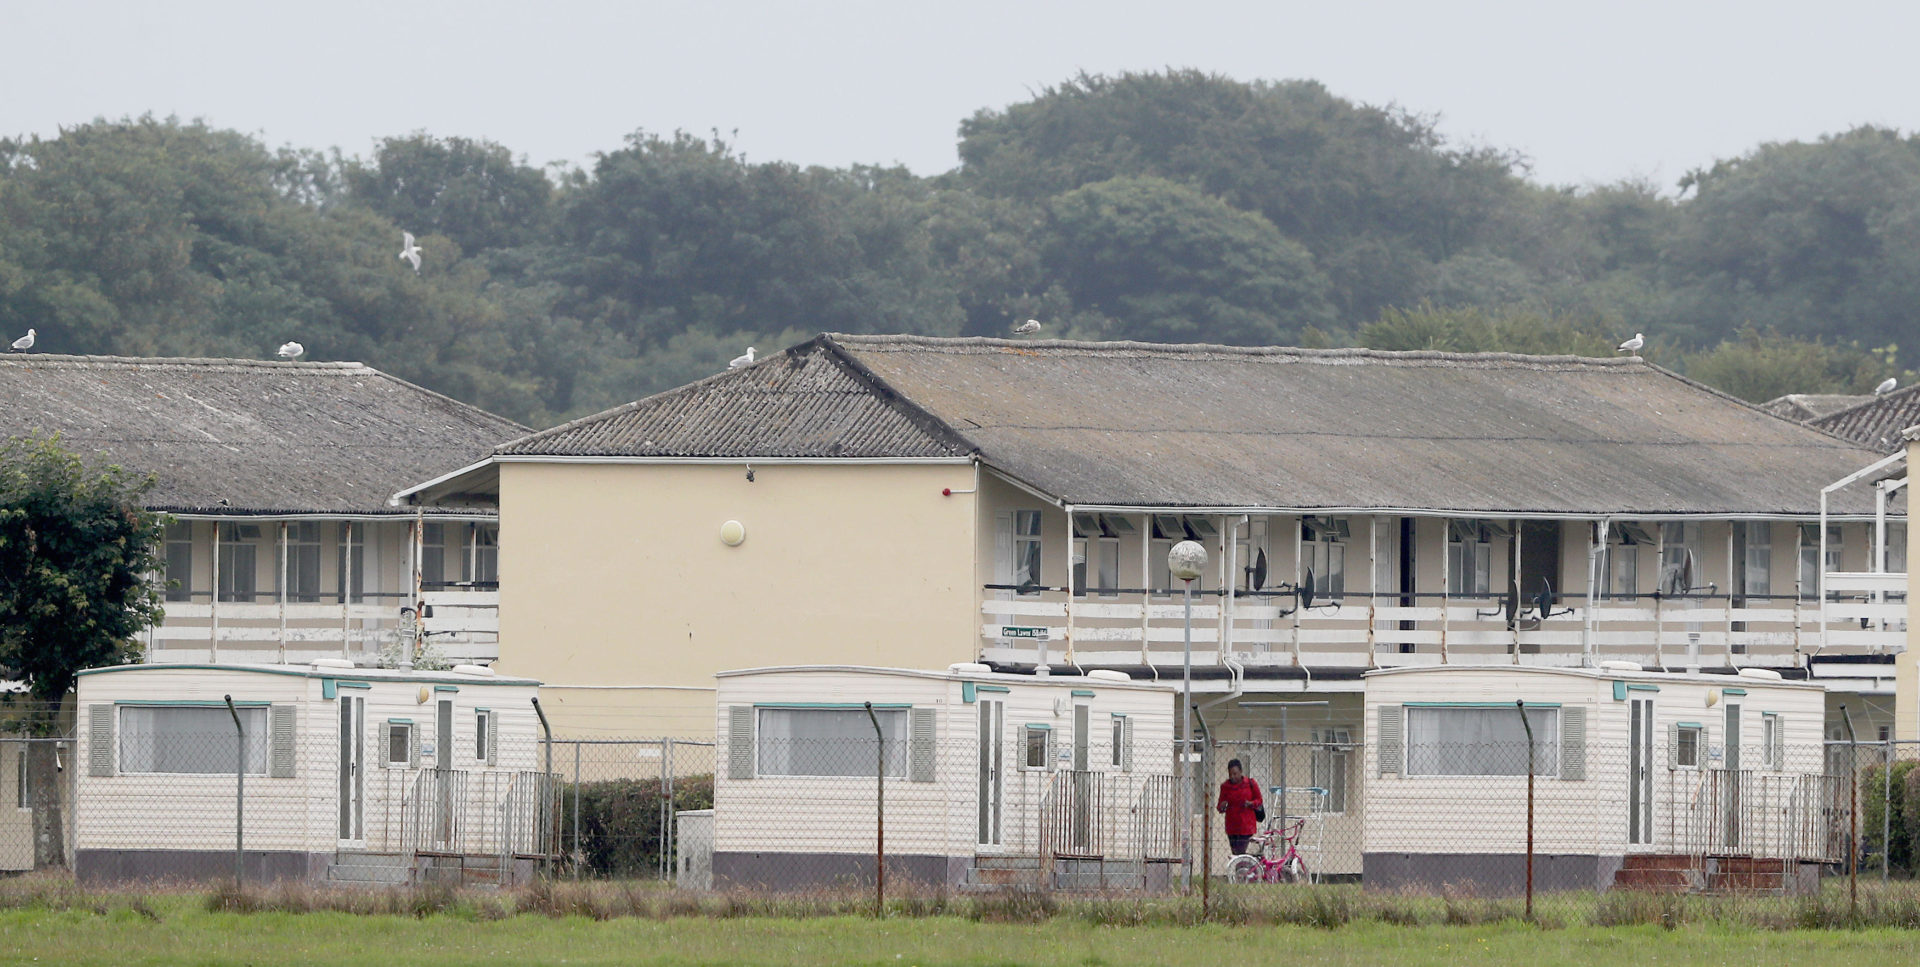 A general view of the Mosney Direct Provision centre in Co Meath which provides for the welfare of asylum seekers and their families as they await decisions on their asylum application. Photo credit should read: Niall Carson/PA Wire